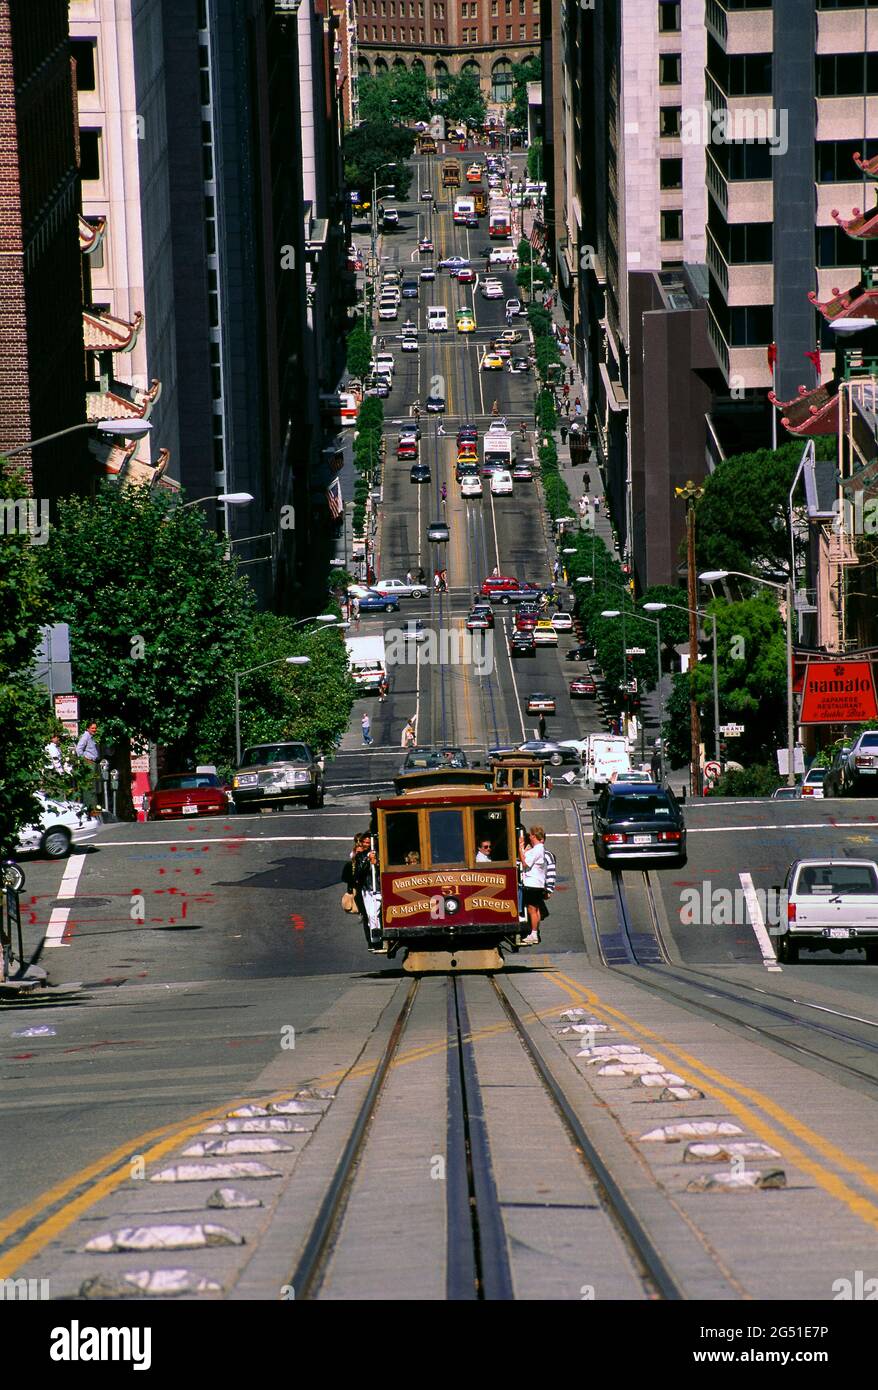 Cable car driving on steep street in San Francisco, California, USA Stock Photo